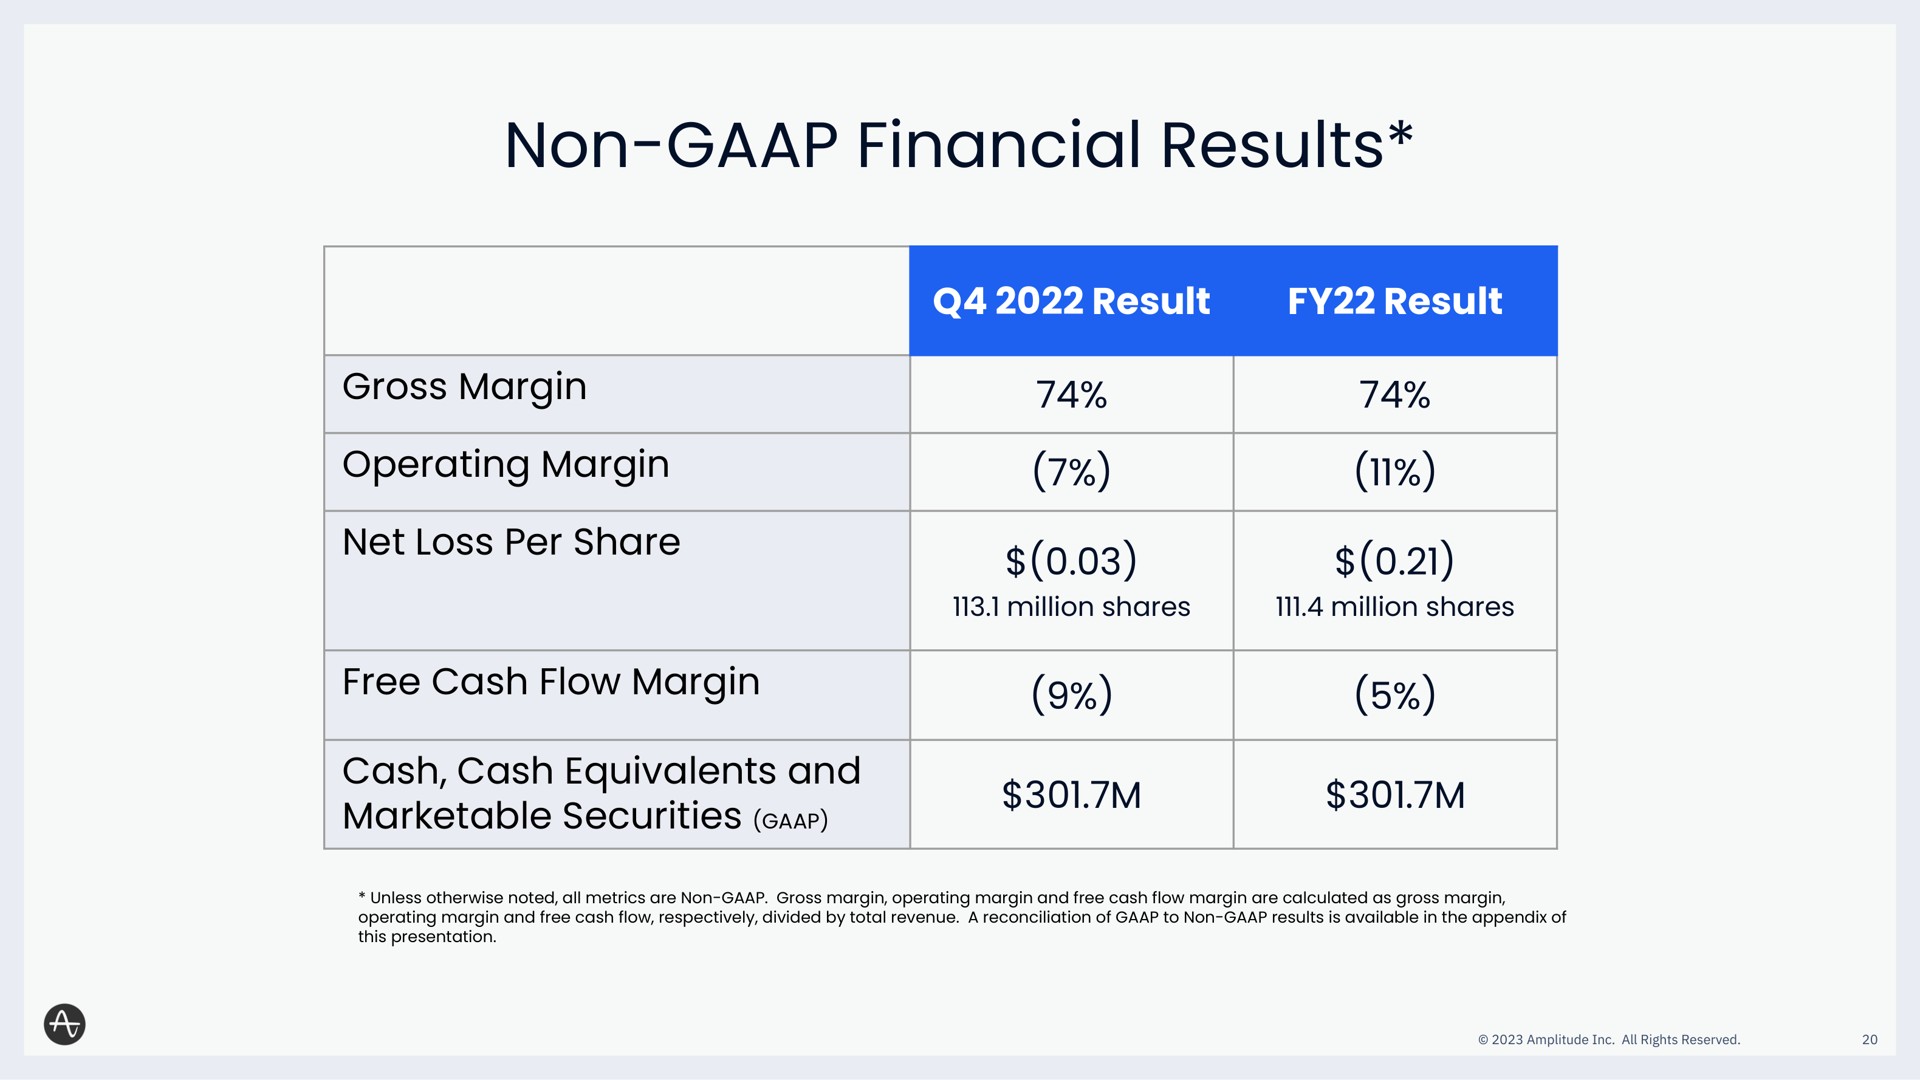 non financial results gross margin operating margin net loss per share result result million shares million shares free cash flow margin cash cash equivalents and marketable securities | Amplitude